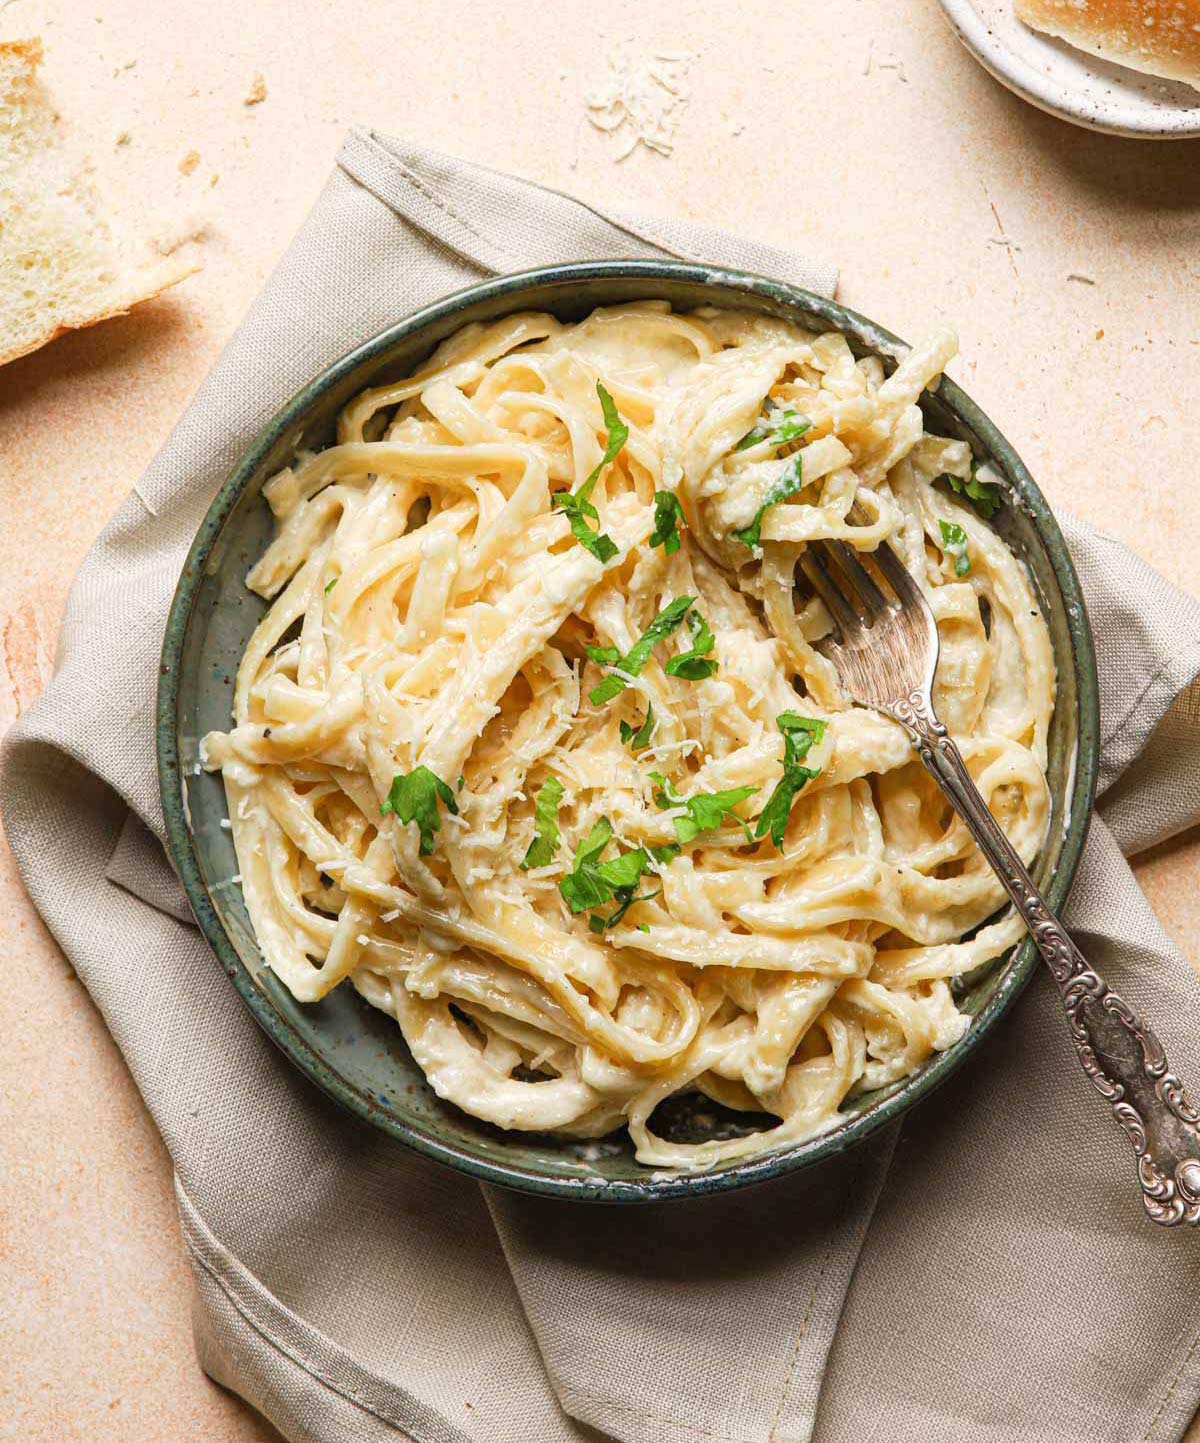 Bowl of fettuccine Alfredo sprinkled with parsley.